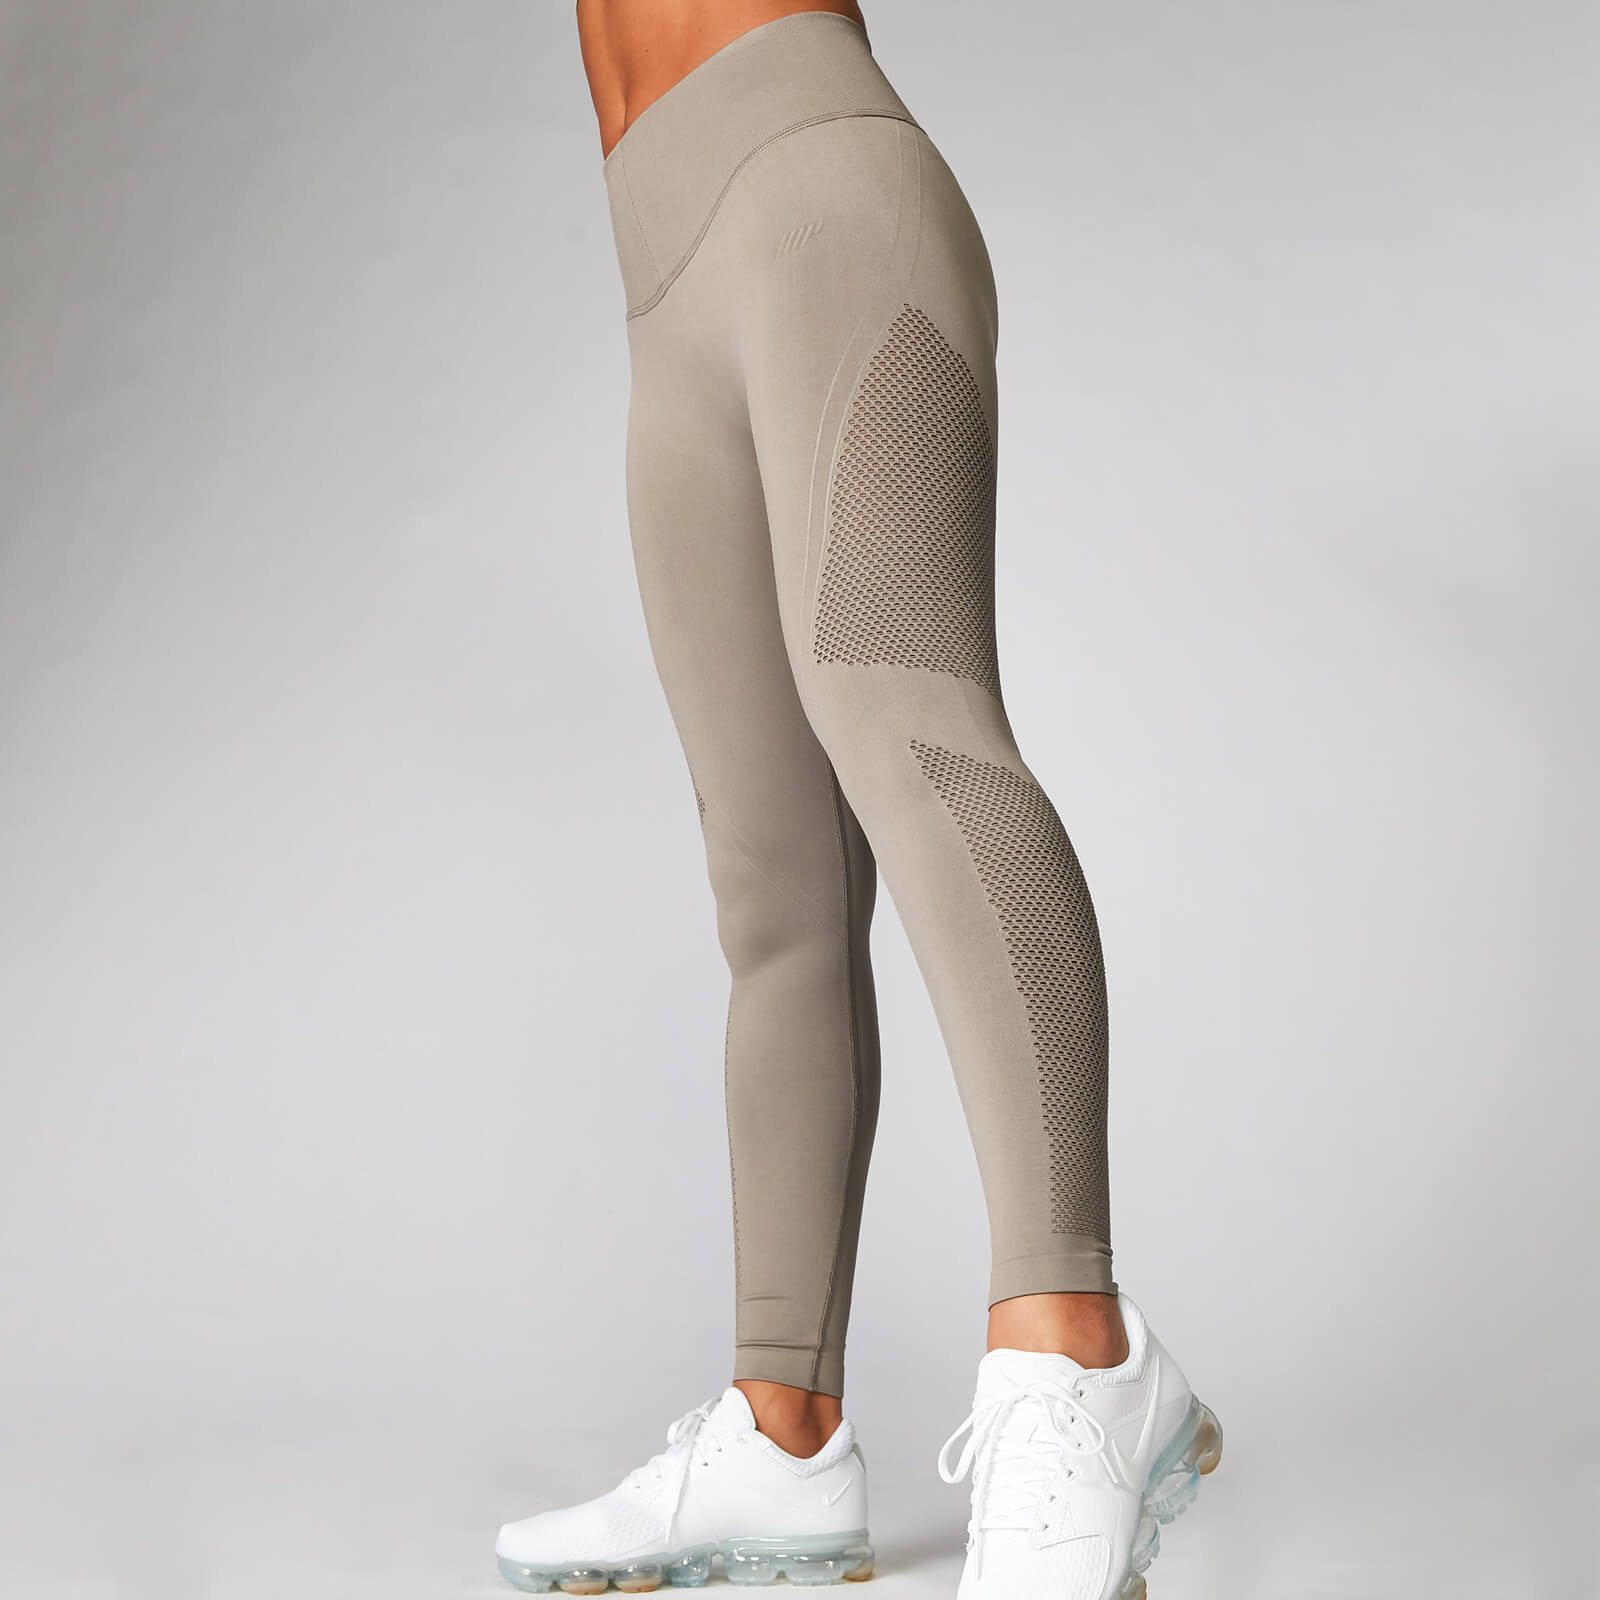 Myprotein Shape Seamless Leggings - Taupe - S